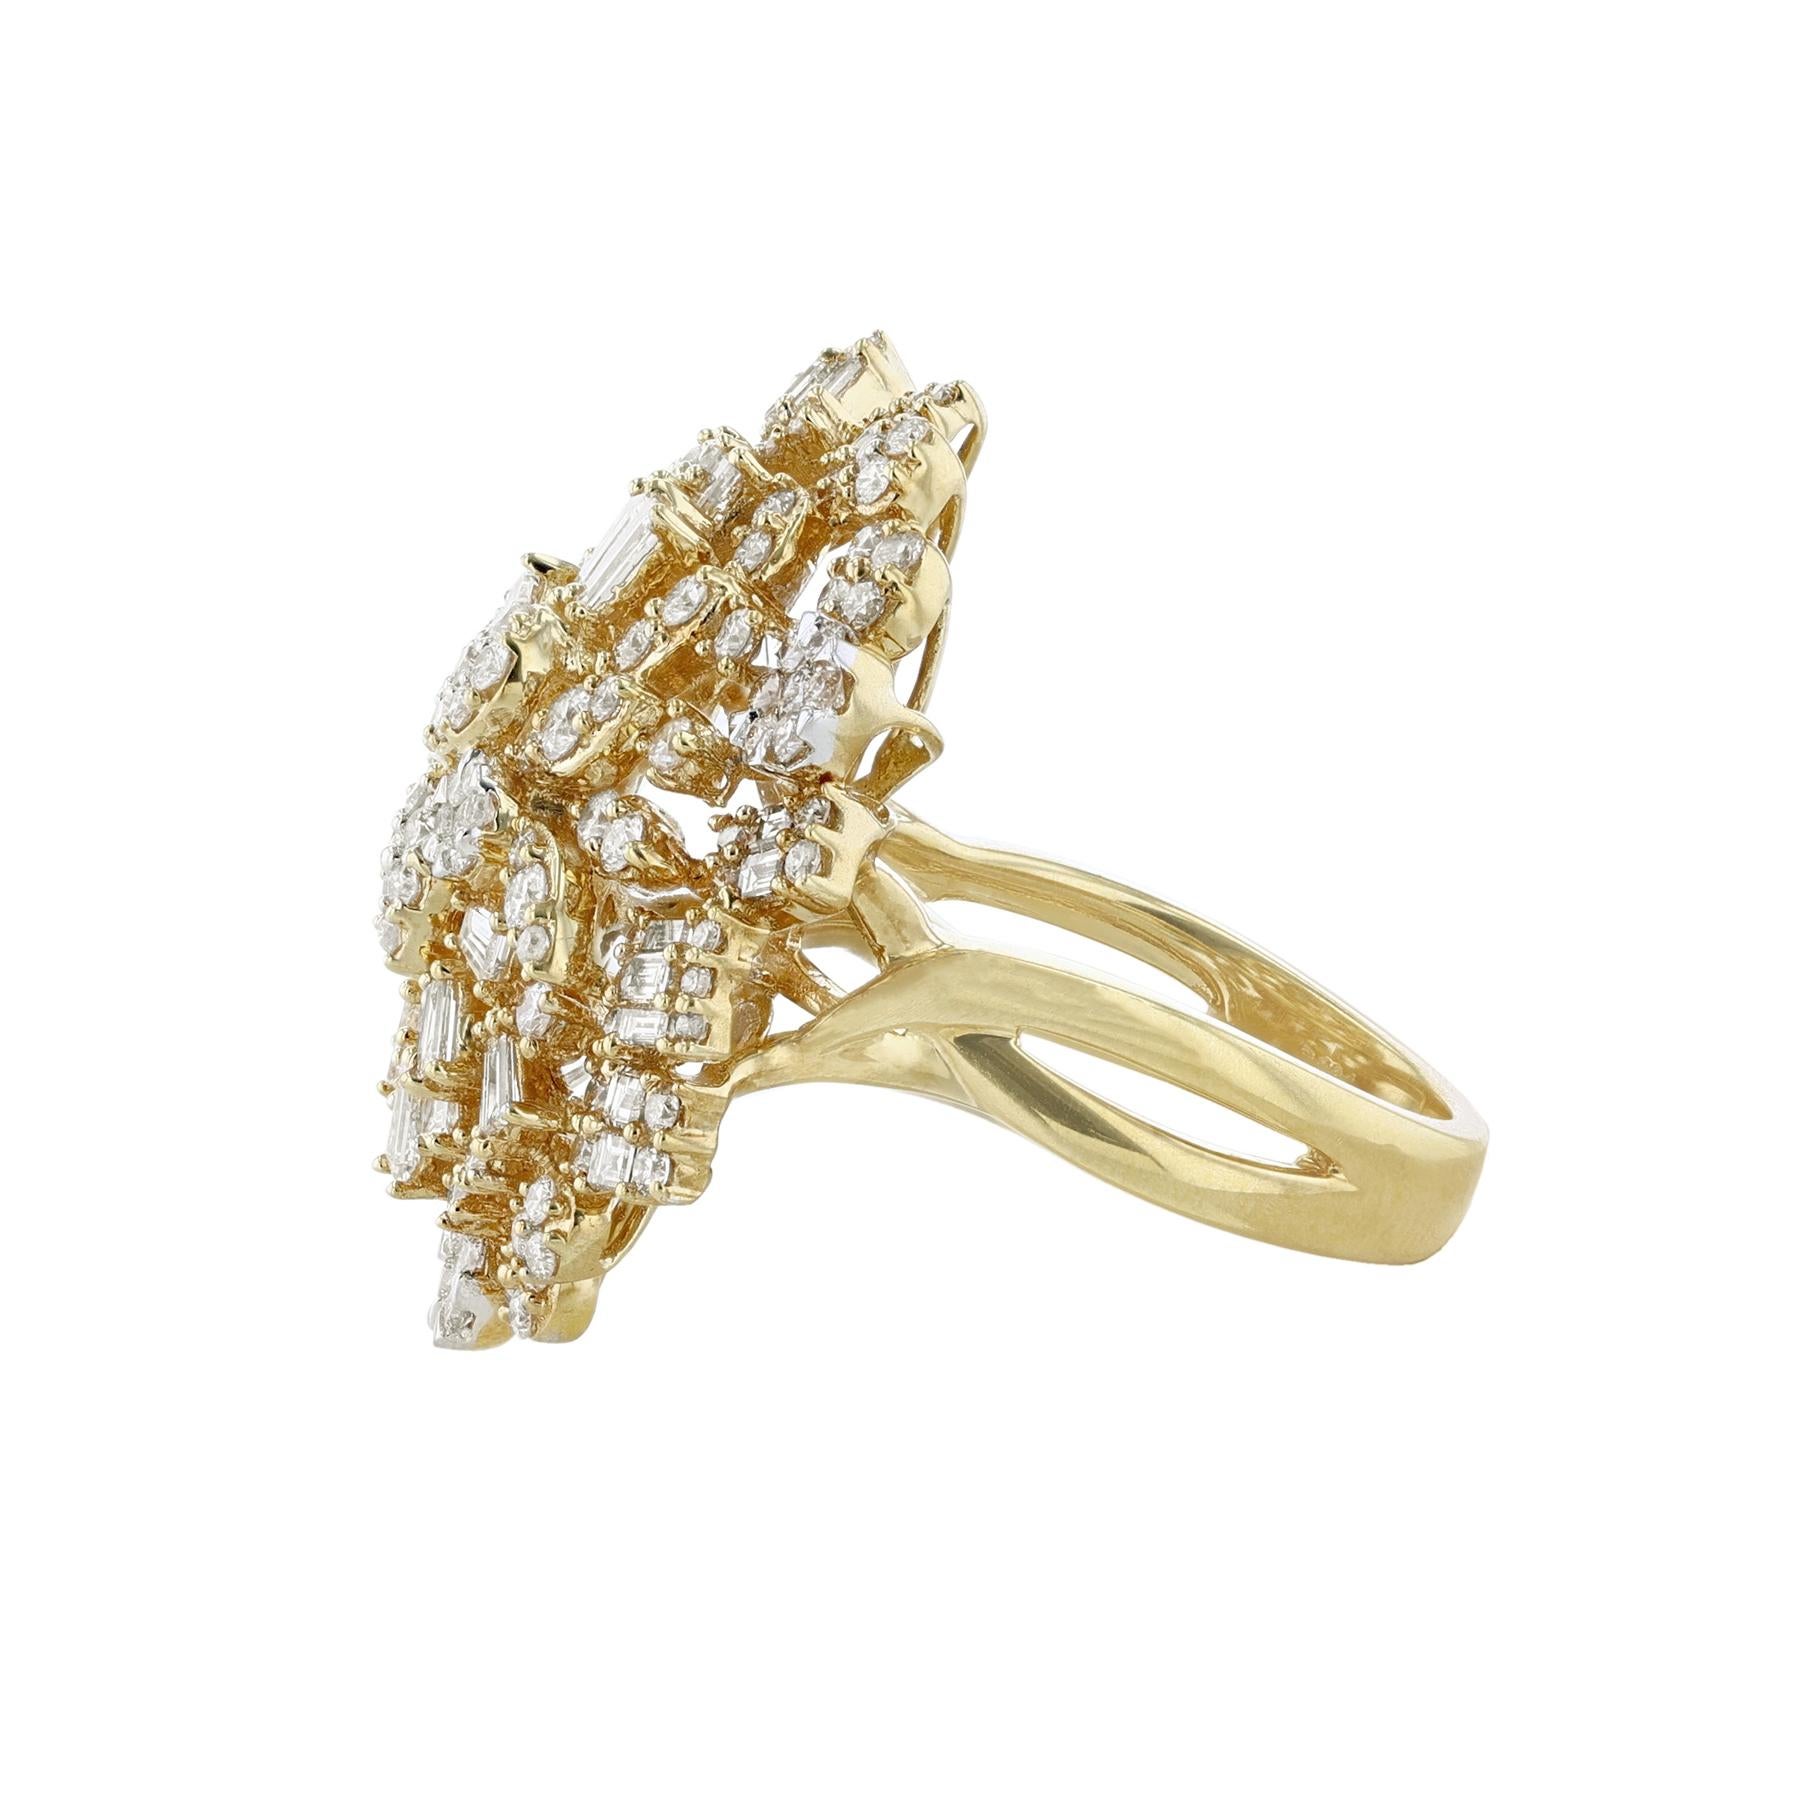 This ring is made in 18K yellow gold and features 35 baguette cut diamonds weighing 1.06 carats. Along with 148 round cut diamonds weighing 1.75 carats. With a color grade (H) and clarity grade (SI2). All stones are prong set.
